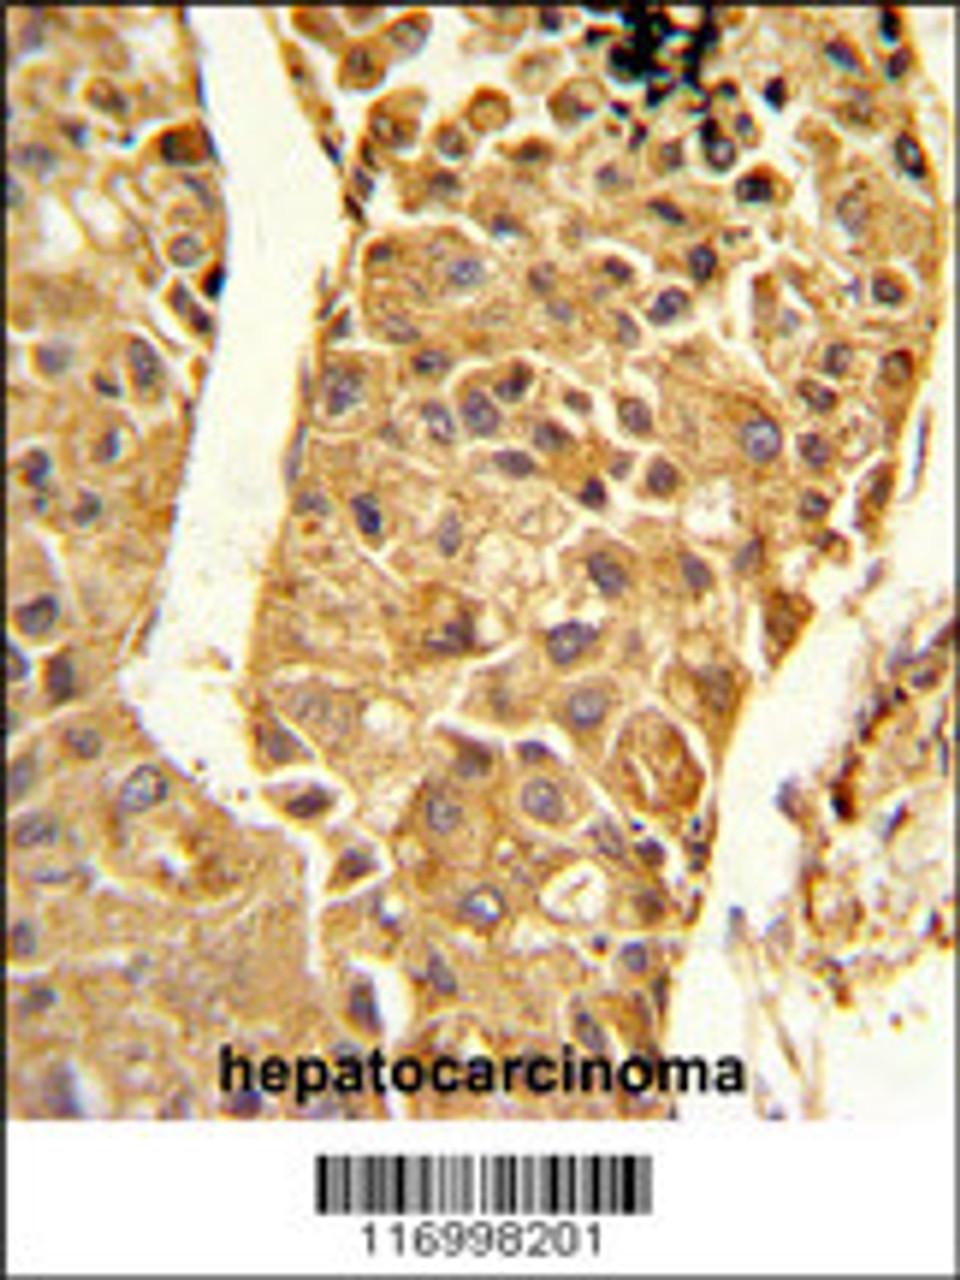 Formalin-fixed and paraffin-embedded human hepatocarcinoma reacted with CYP2C18 Antibody, which was peroxidase-conjugated to the secondary antibody, followed by DAB staining.